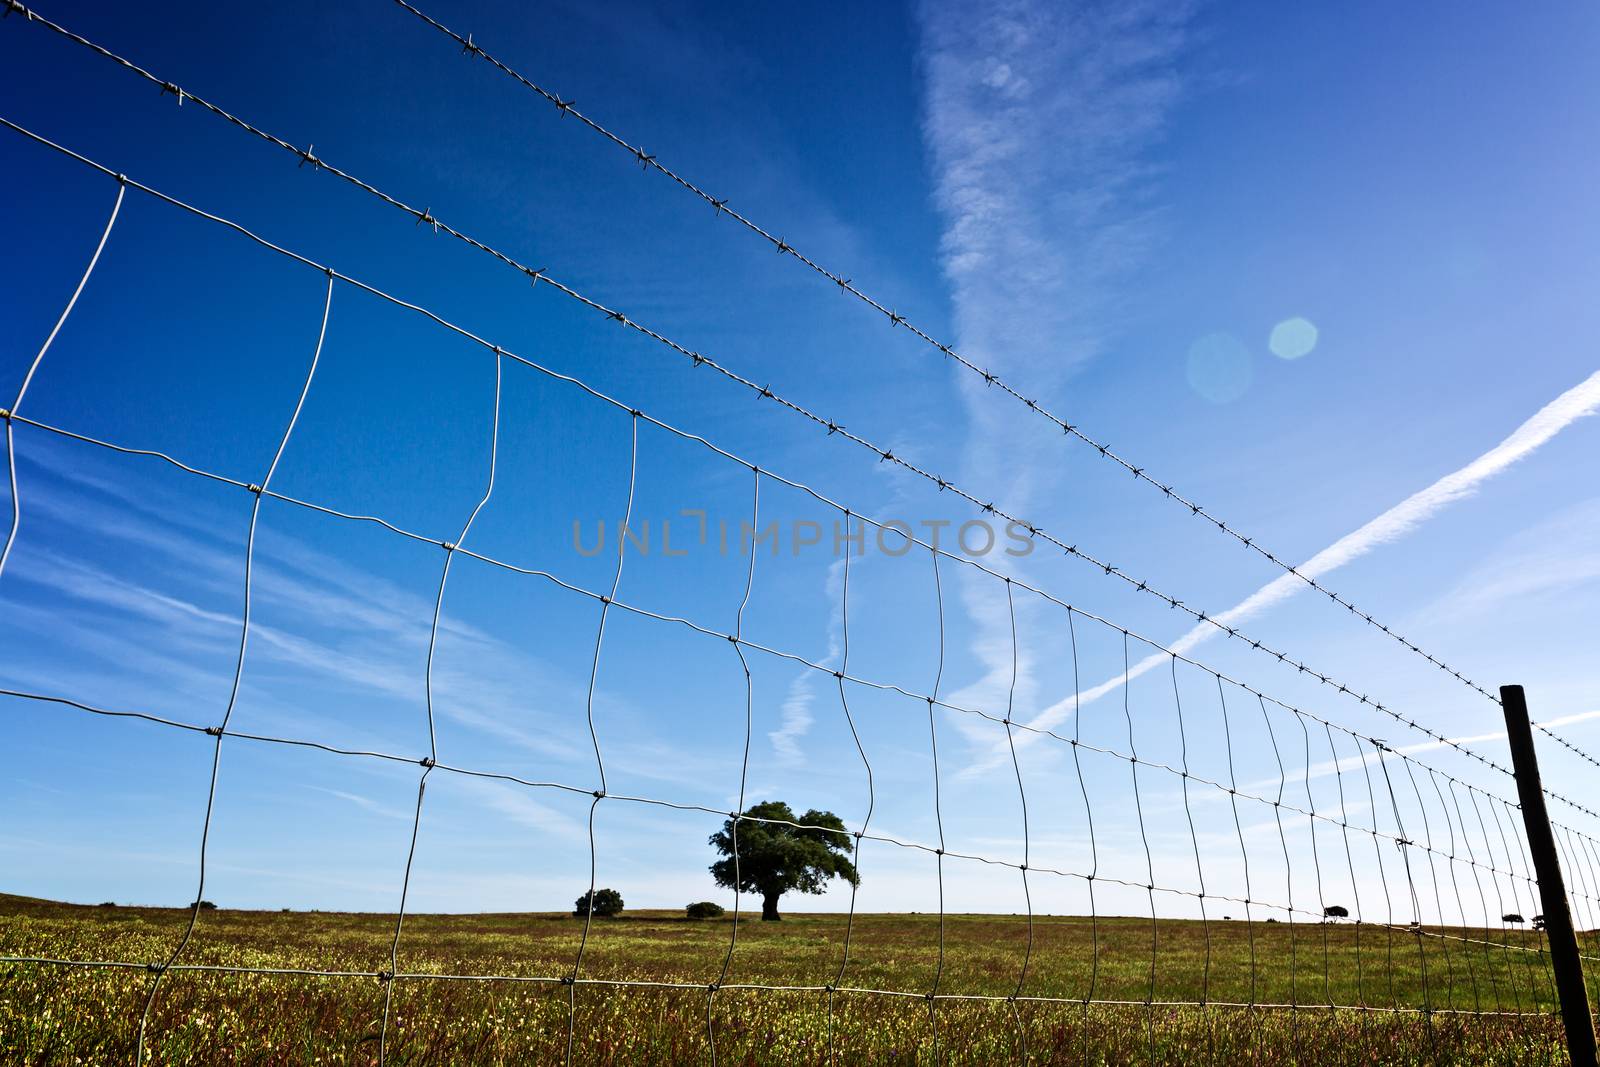 View through the barbed wire fence on the single tree in field